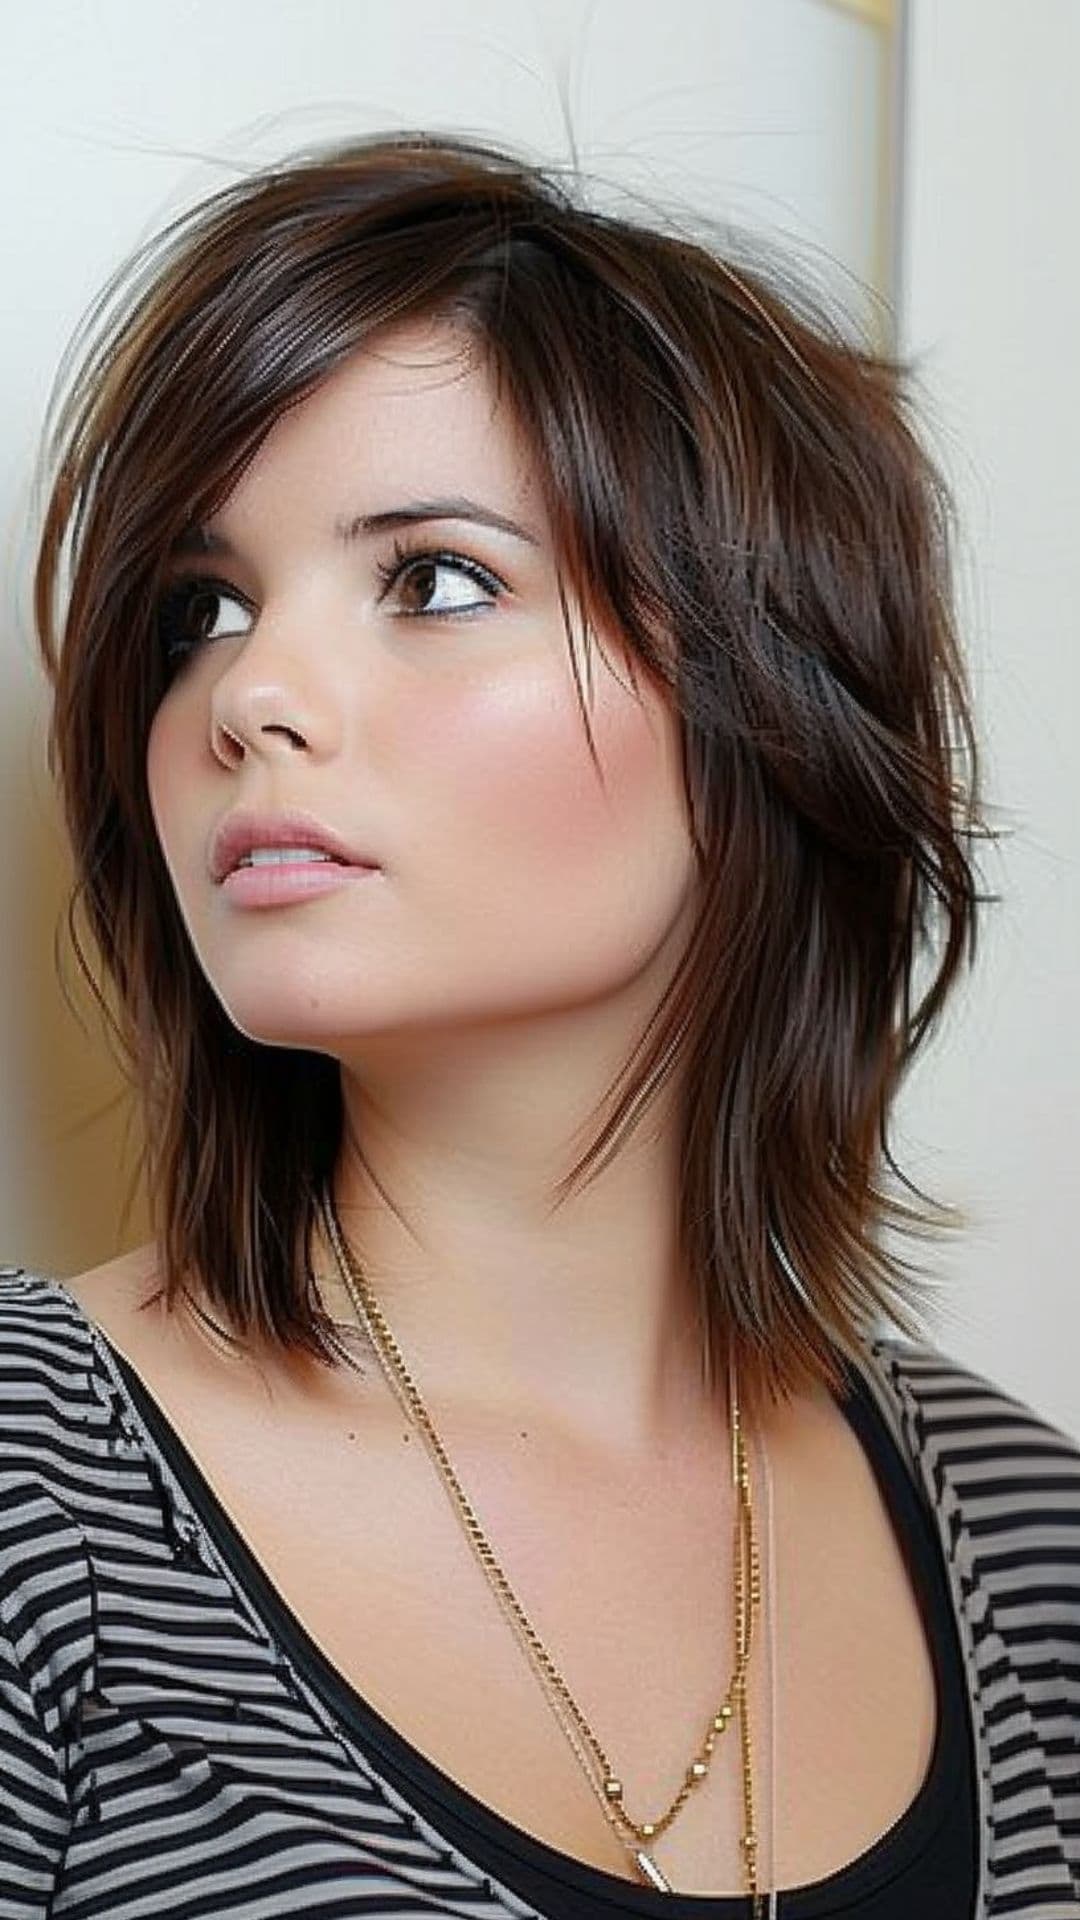 A woman modelling a layered shoulder-length hair with side bangs.